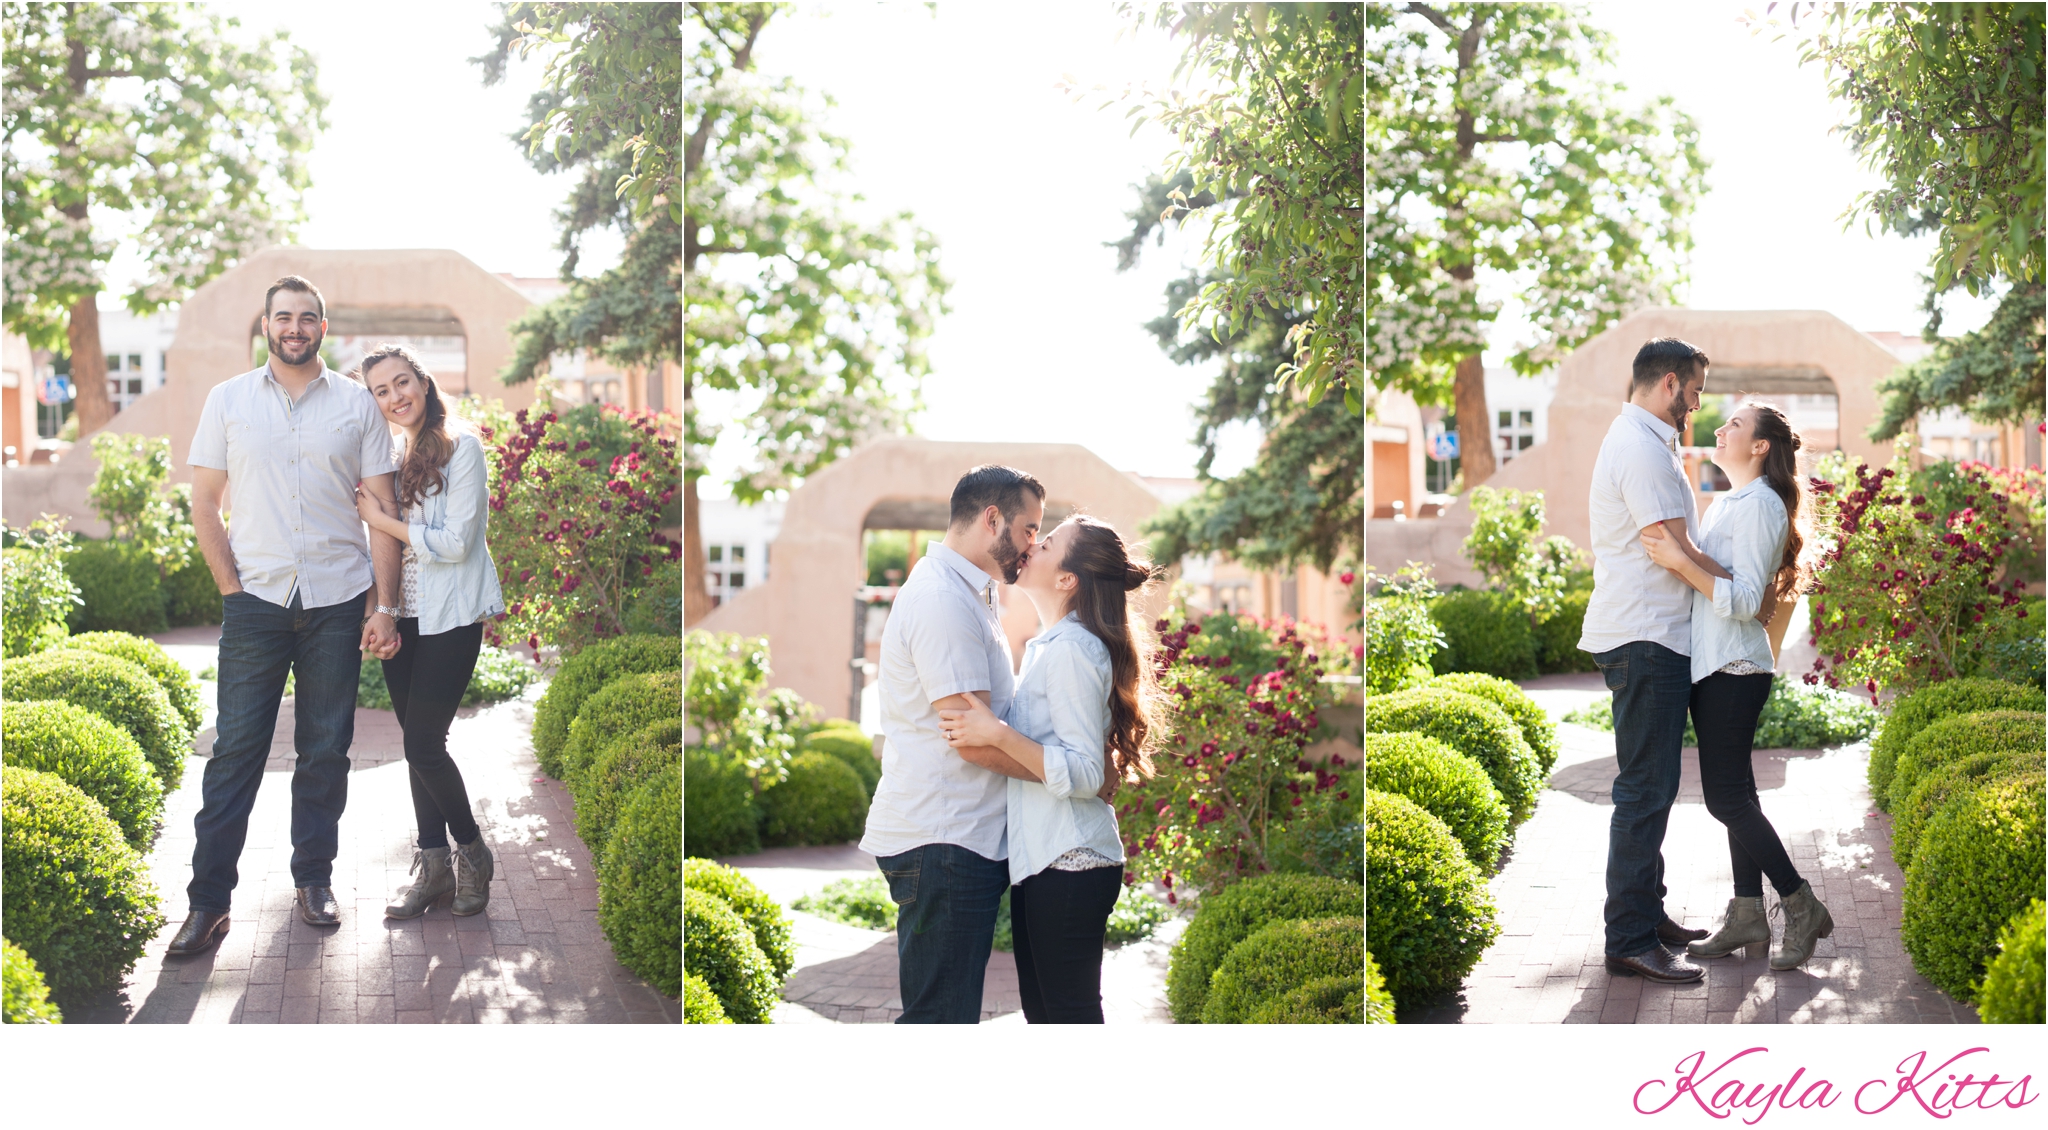 kayla kitts photography - albuquerque wedding photographer - green jeans - brewery engagement session - old town - destination wedding - cabo wedding photographer - santa fe brewery_0008.jpg